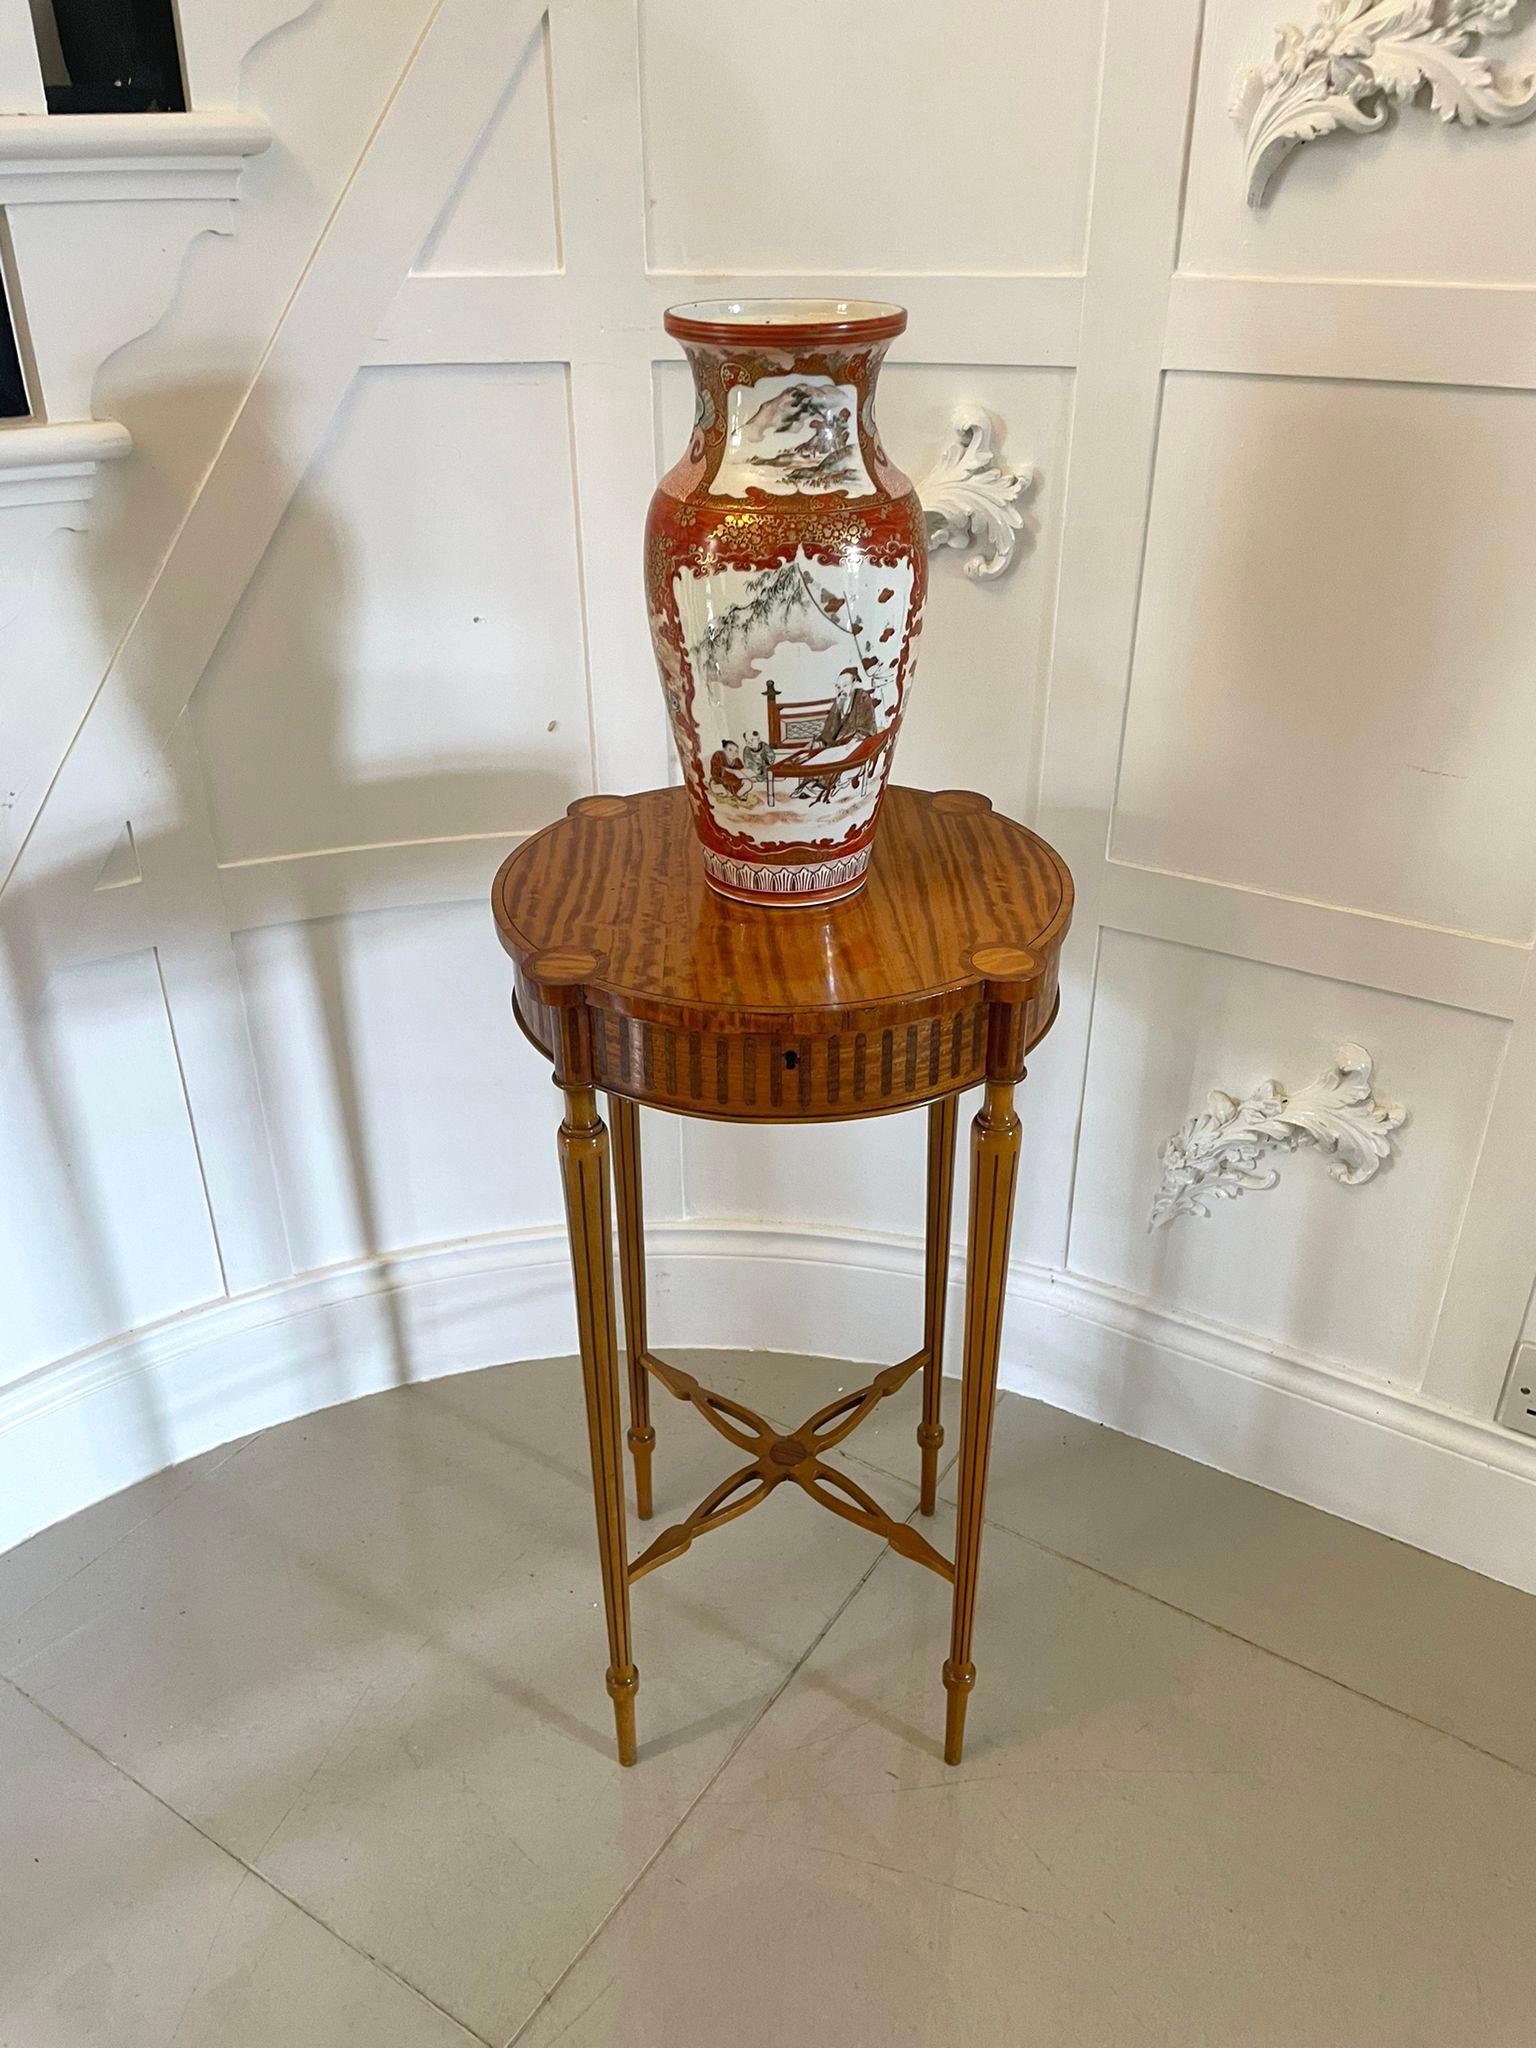 Fine quality antique inlaid satinwood shaped top centre table having the most spectacular quality shaped inlaid satinwood lift up top which opens to reveal a charming interior comprising a fitted lift up tray and compartments. It boasts a superior